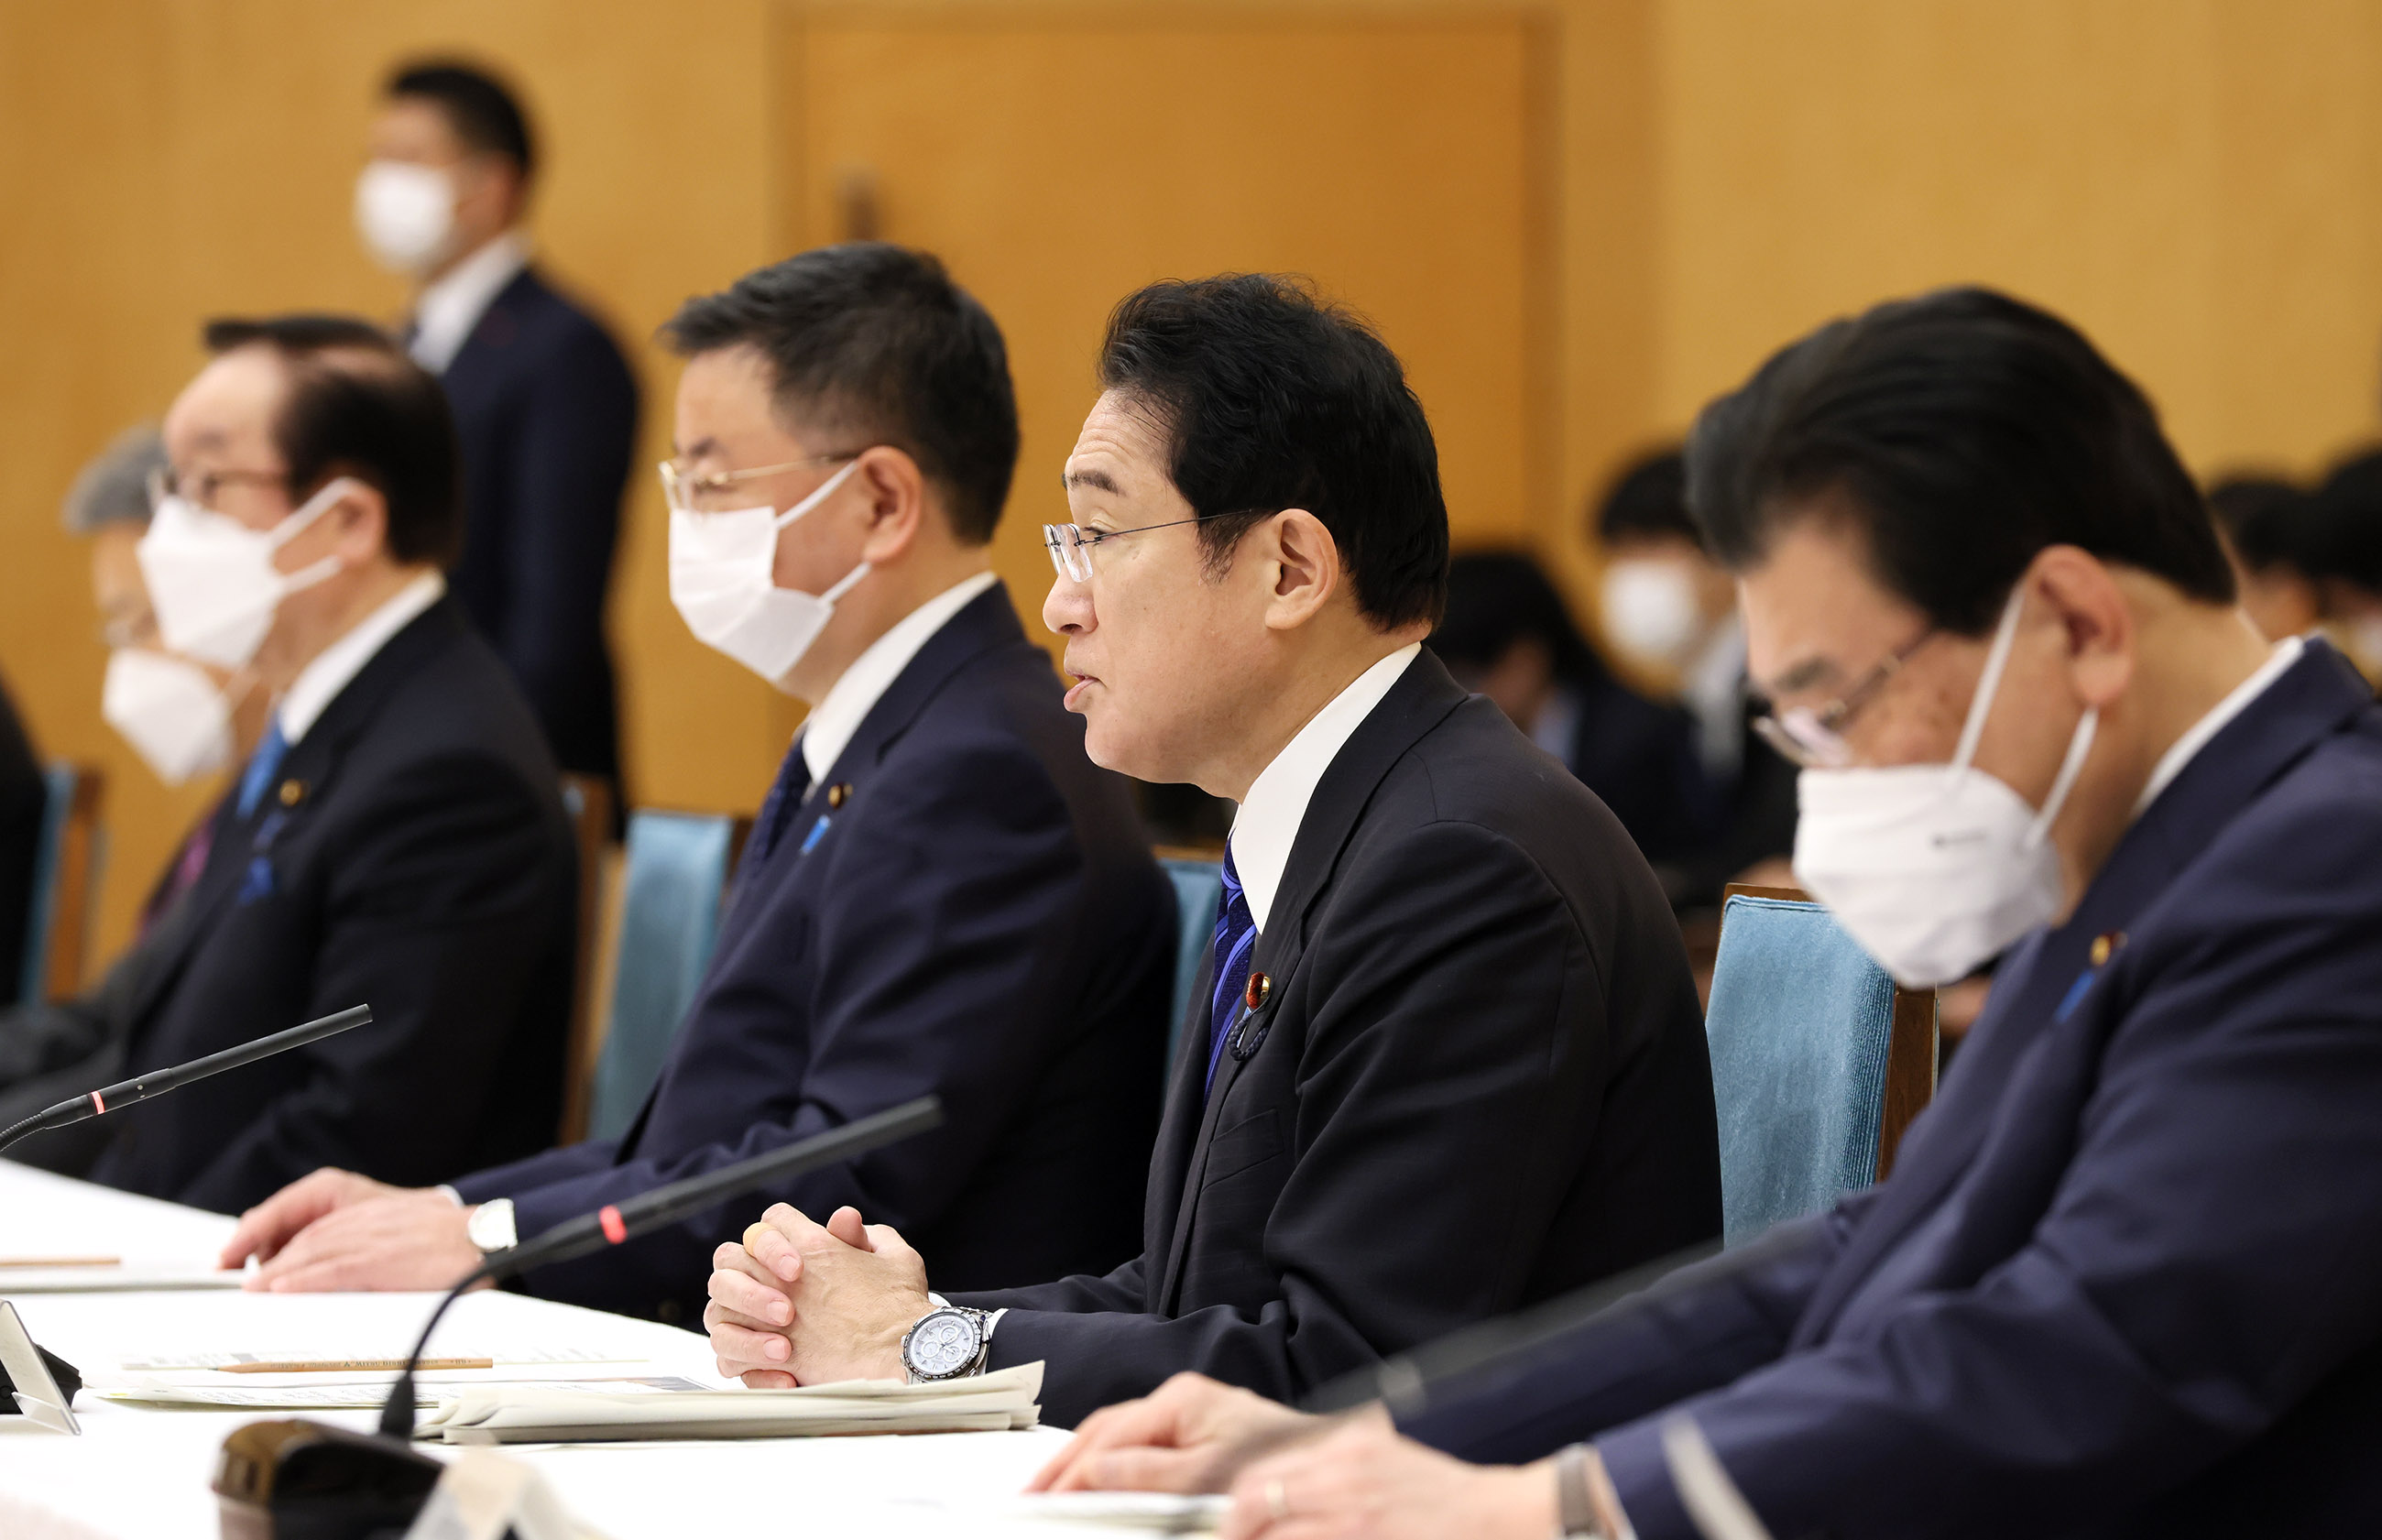 Prime Minister Kishida wrapping up a meeting (1)